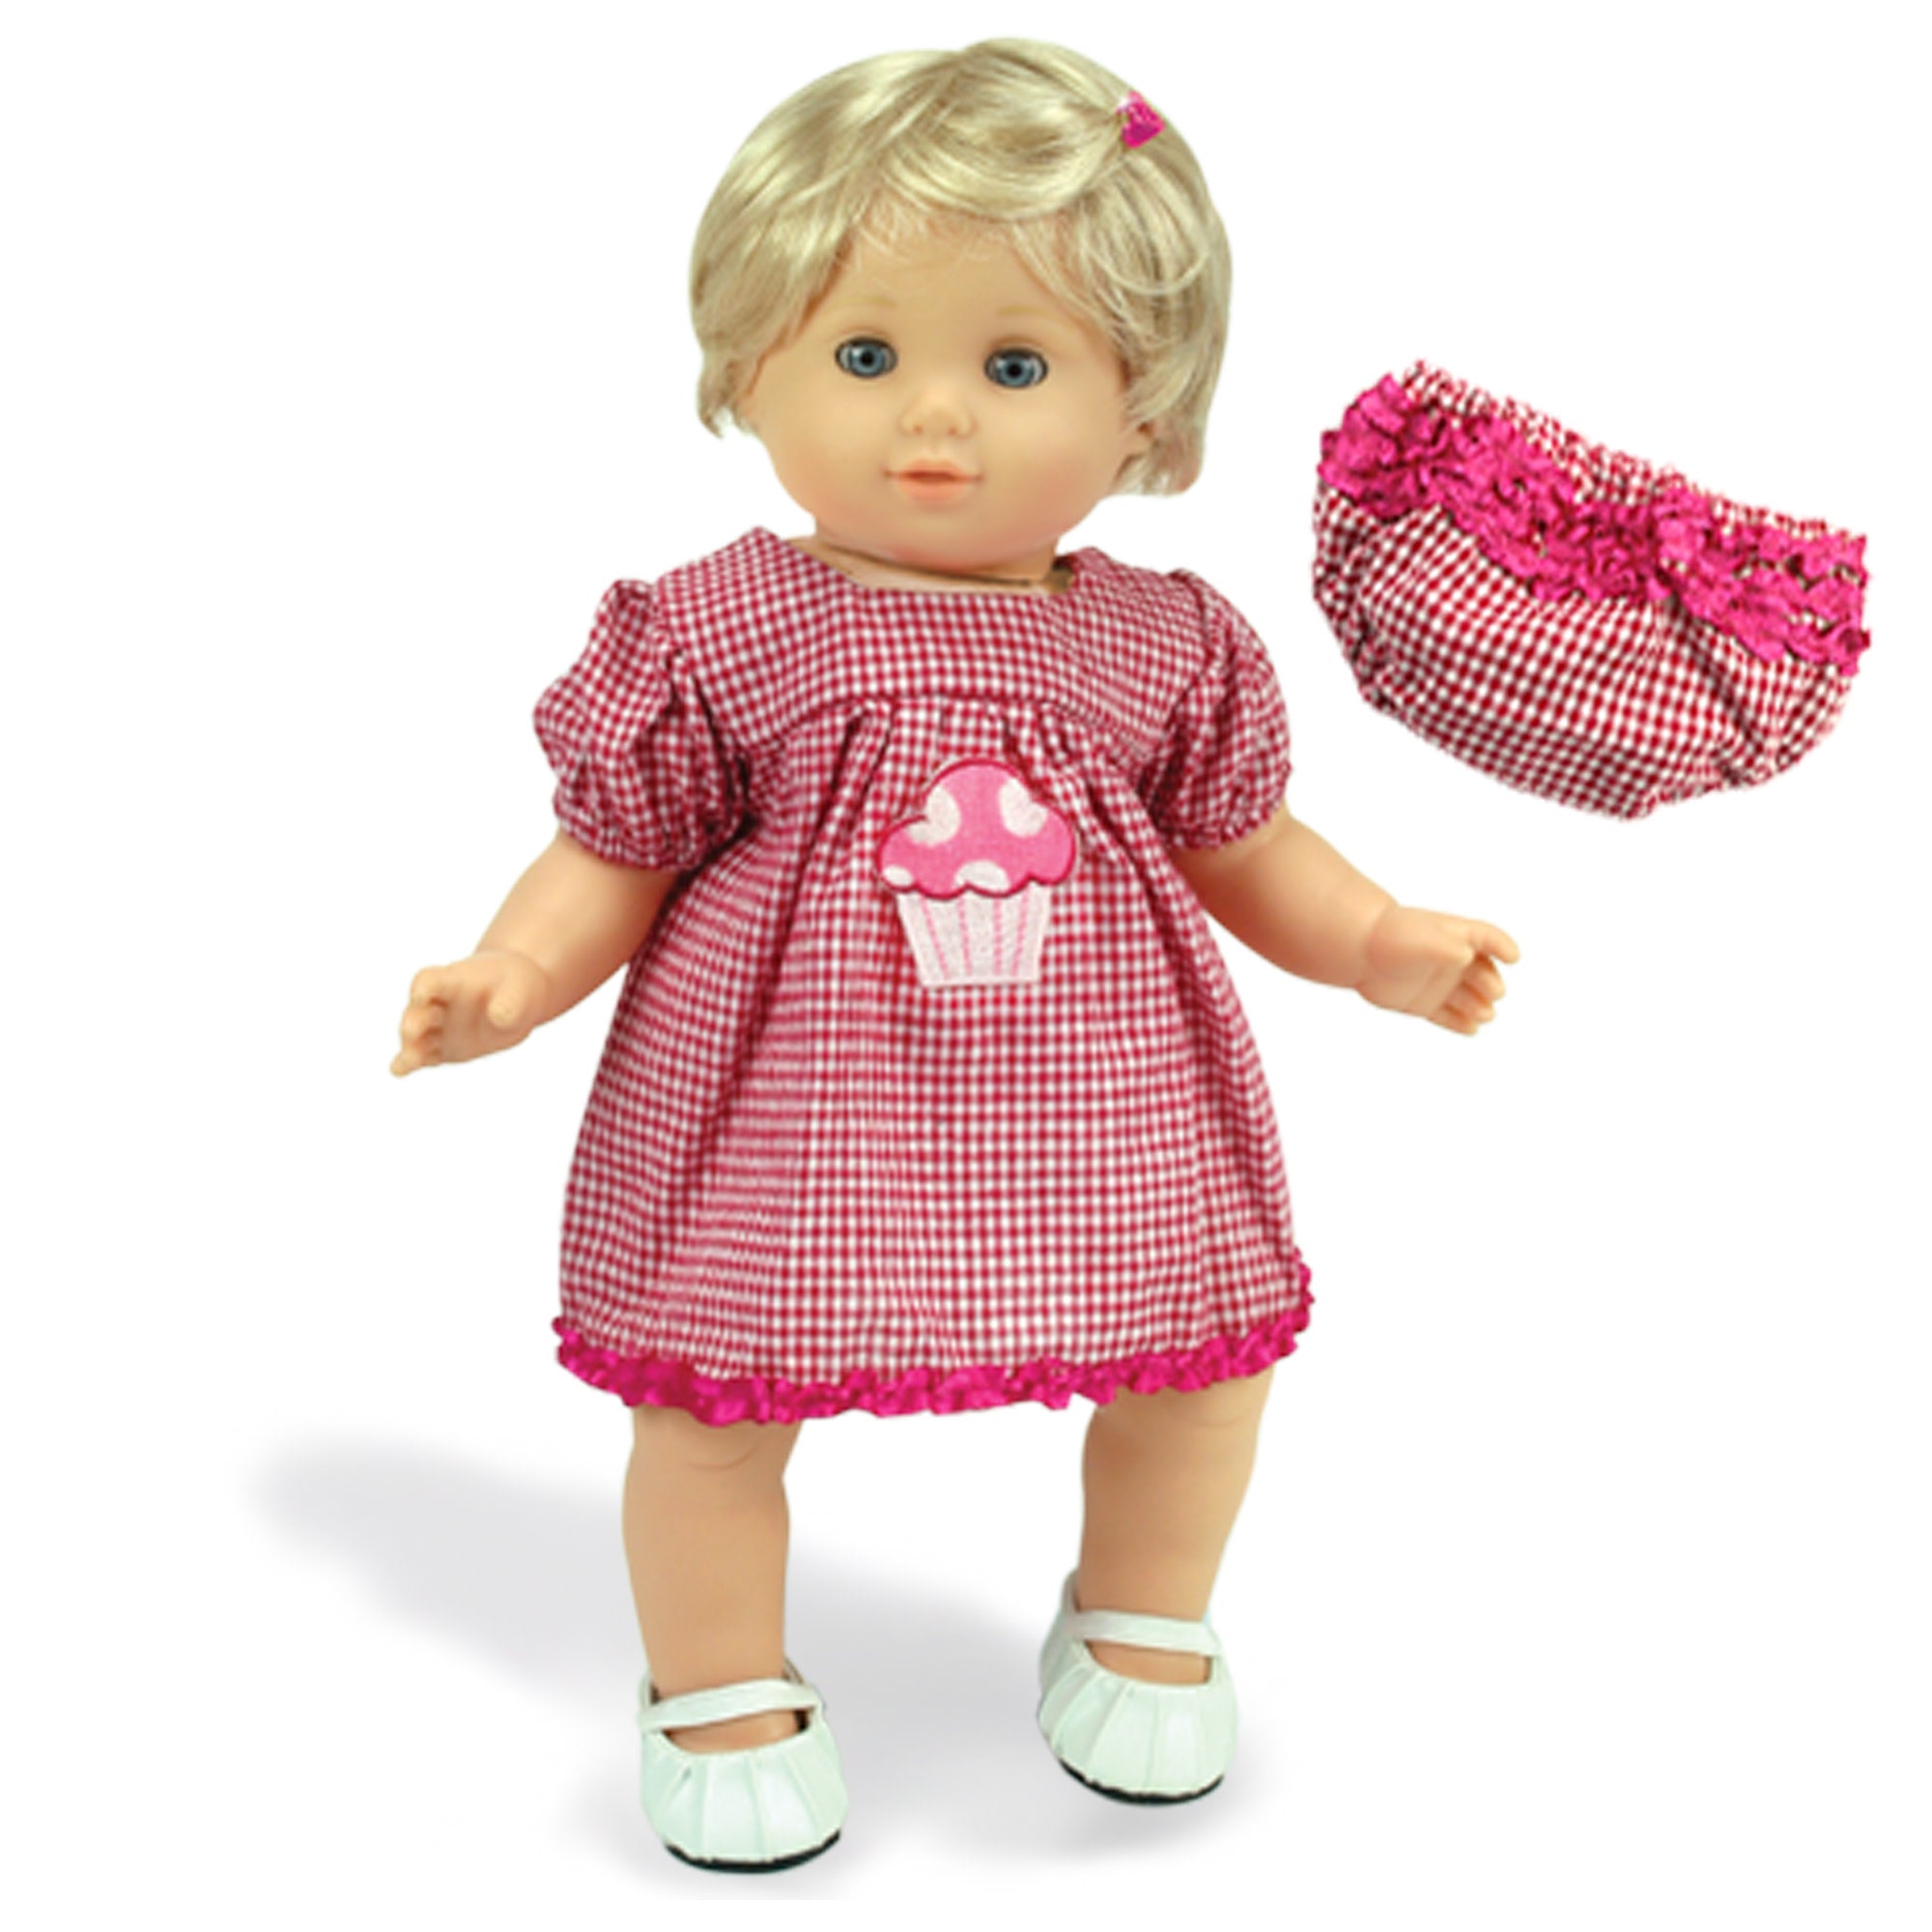 Sophia’s Gingham Cupcake Dress & Matching Bloomers with Ruffled Lace Details for 15” Baby Dolls, Hot Pink